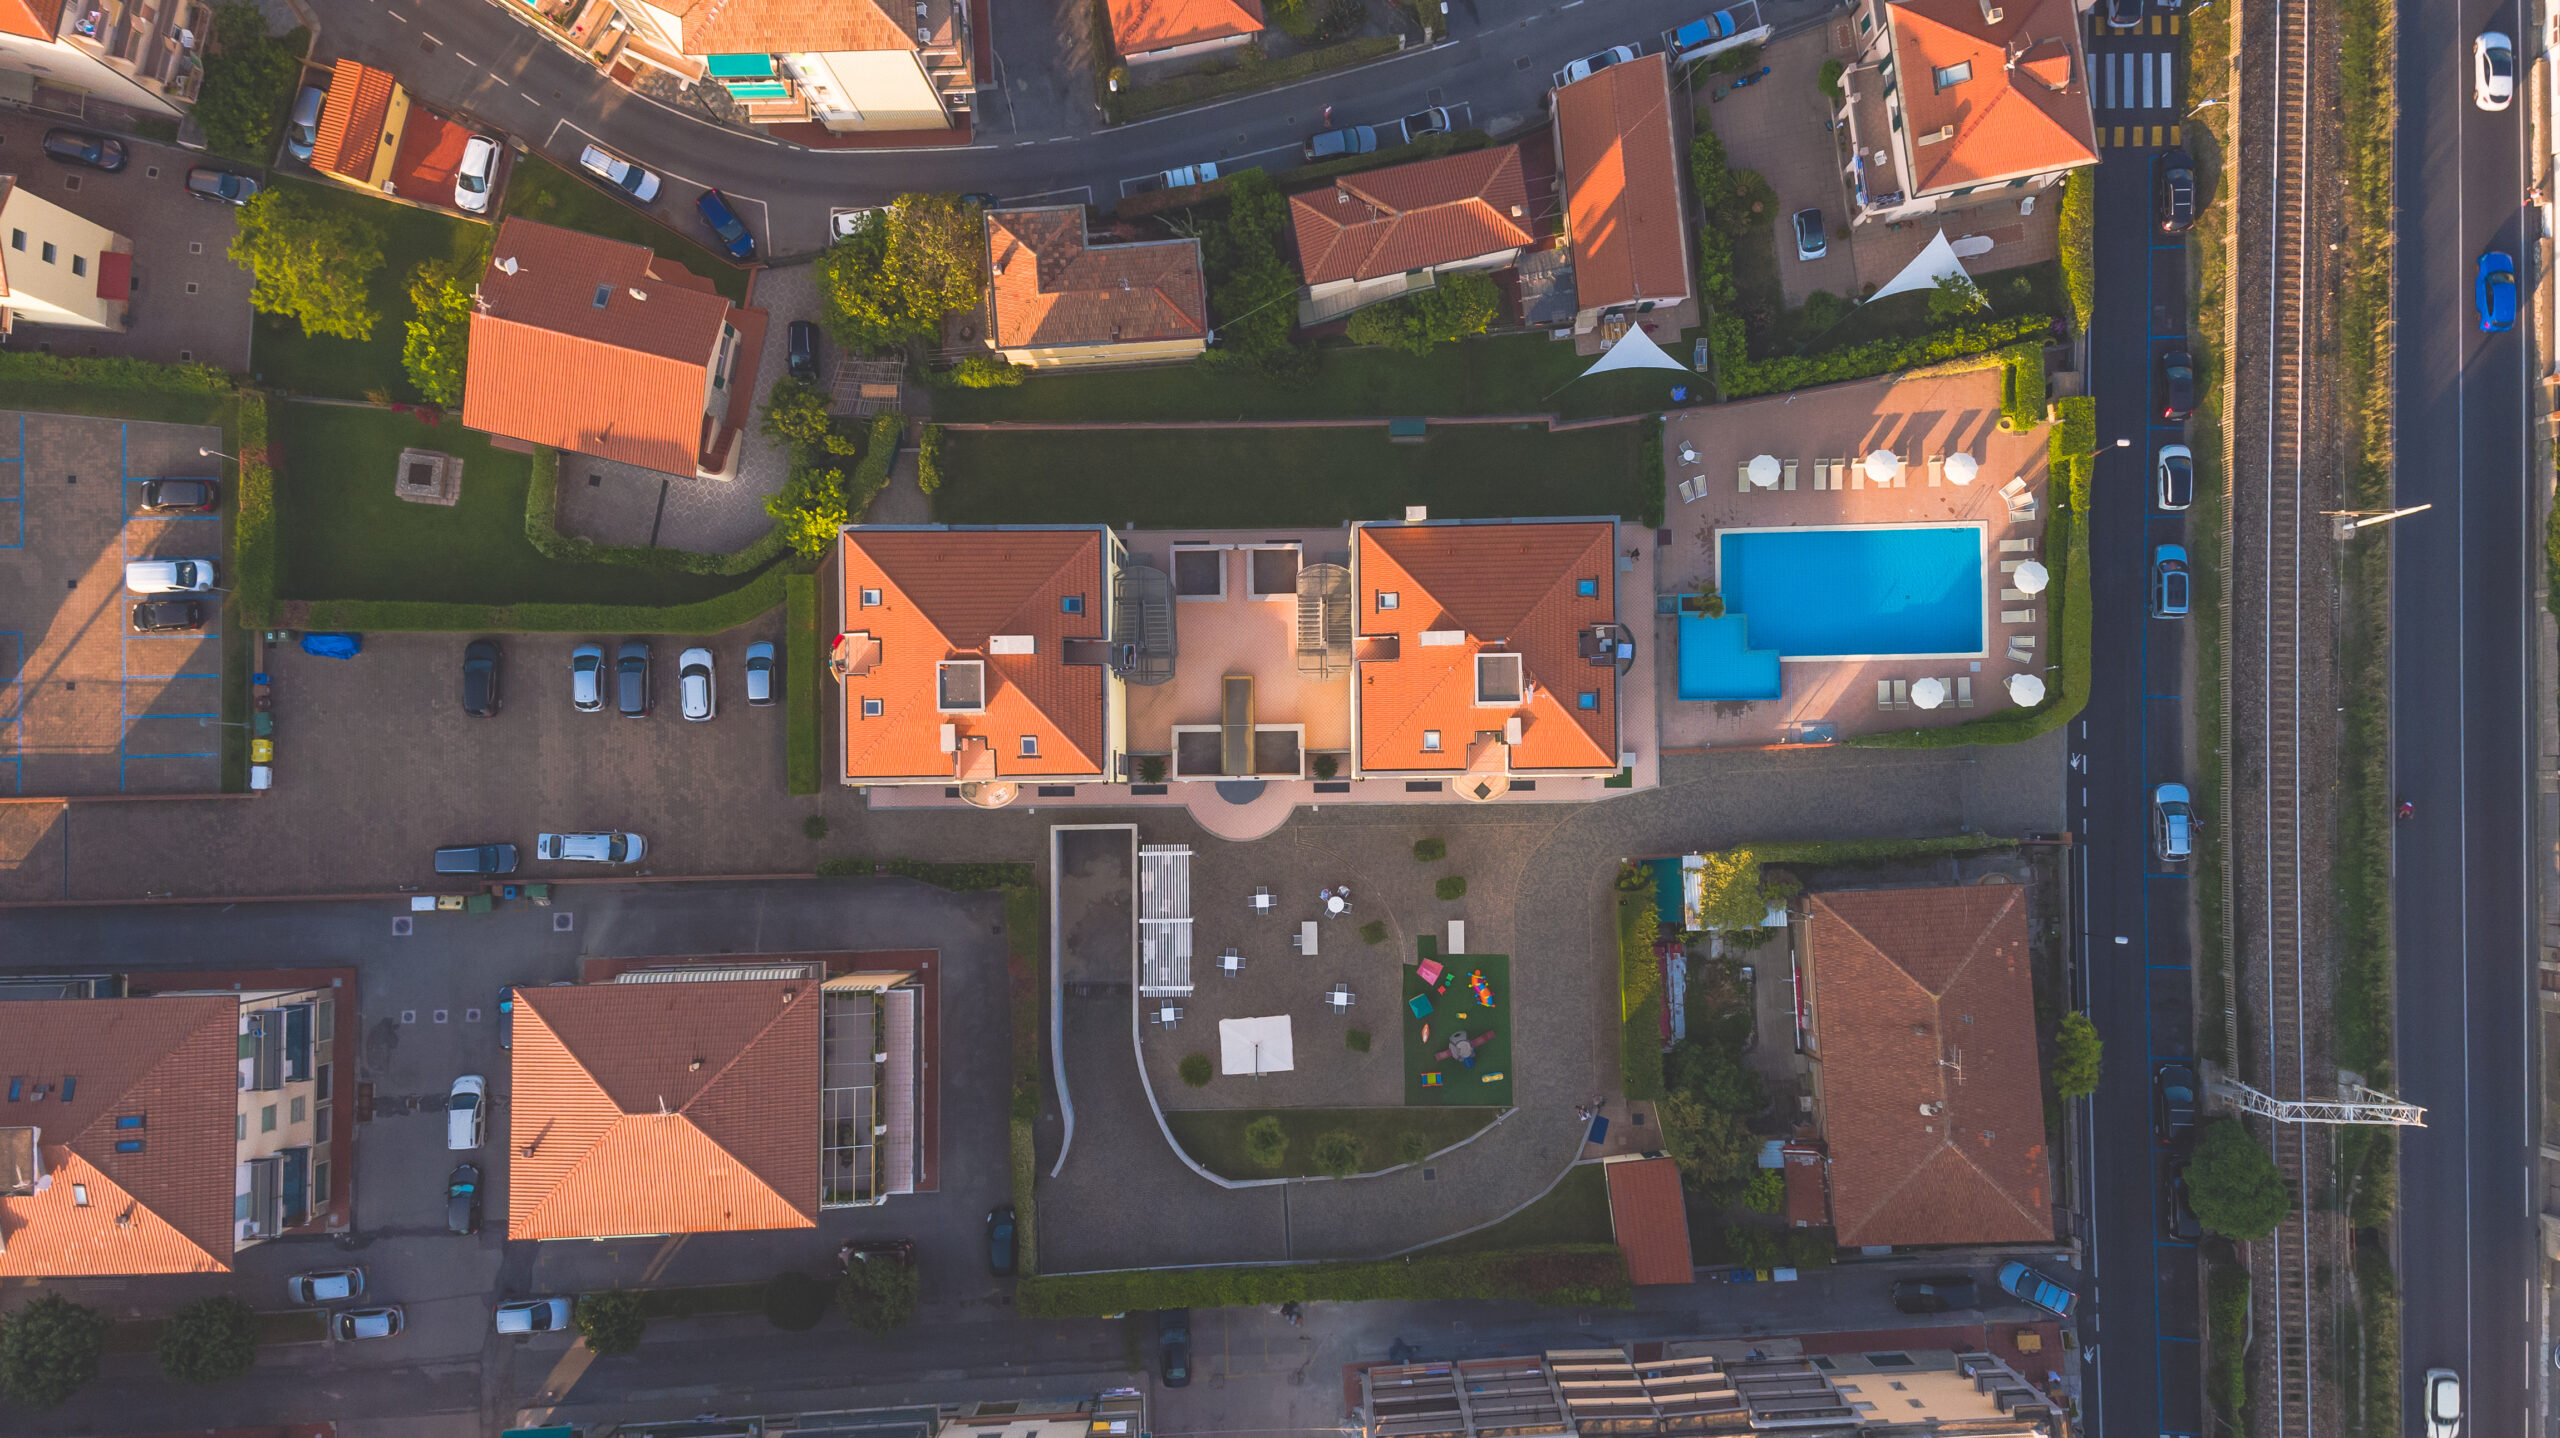 Residence Le Saline seen from above